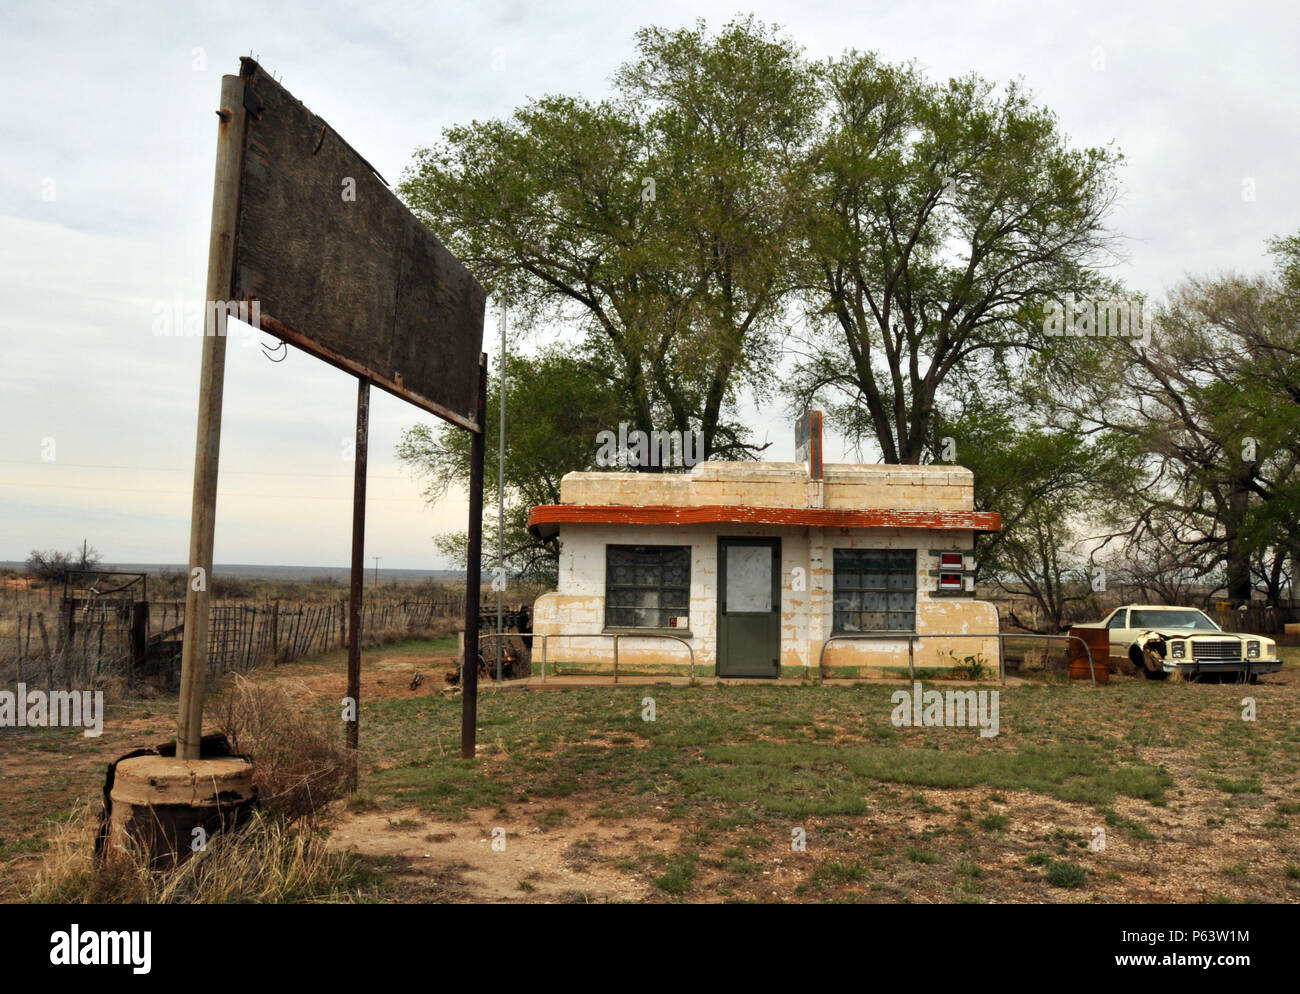 An abandoned car sits beside the closed Little Juarez Cafe in the Route 66 ghost town of Glenrio, which sits on the Texas - New Mexico state line. Stock Photo